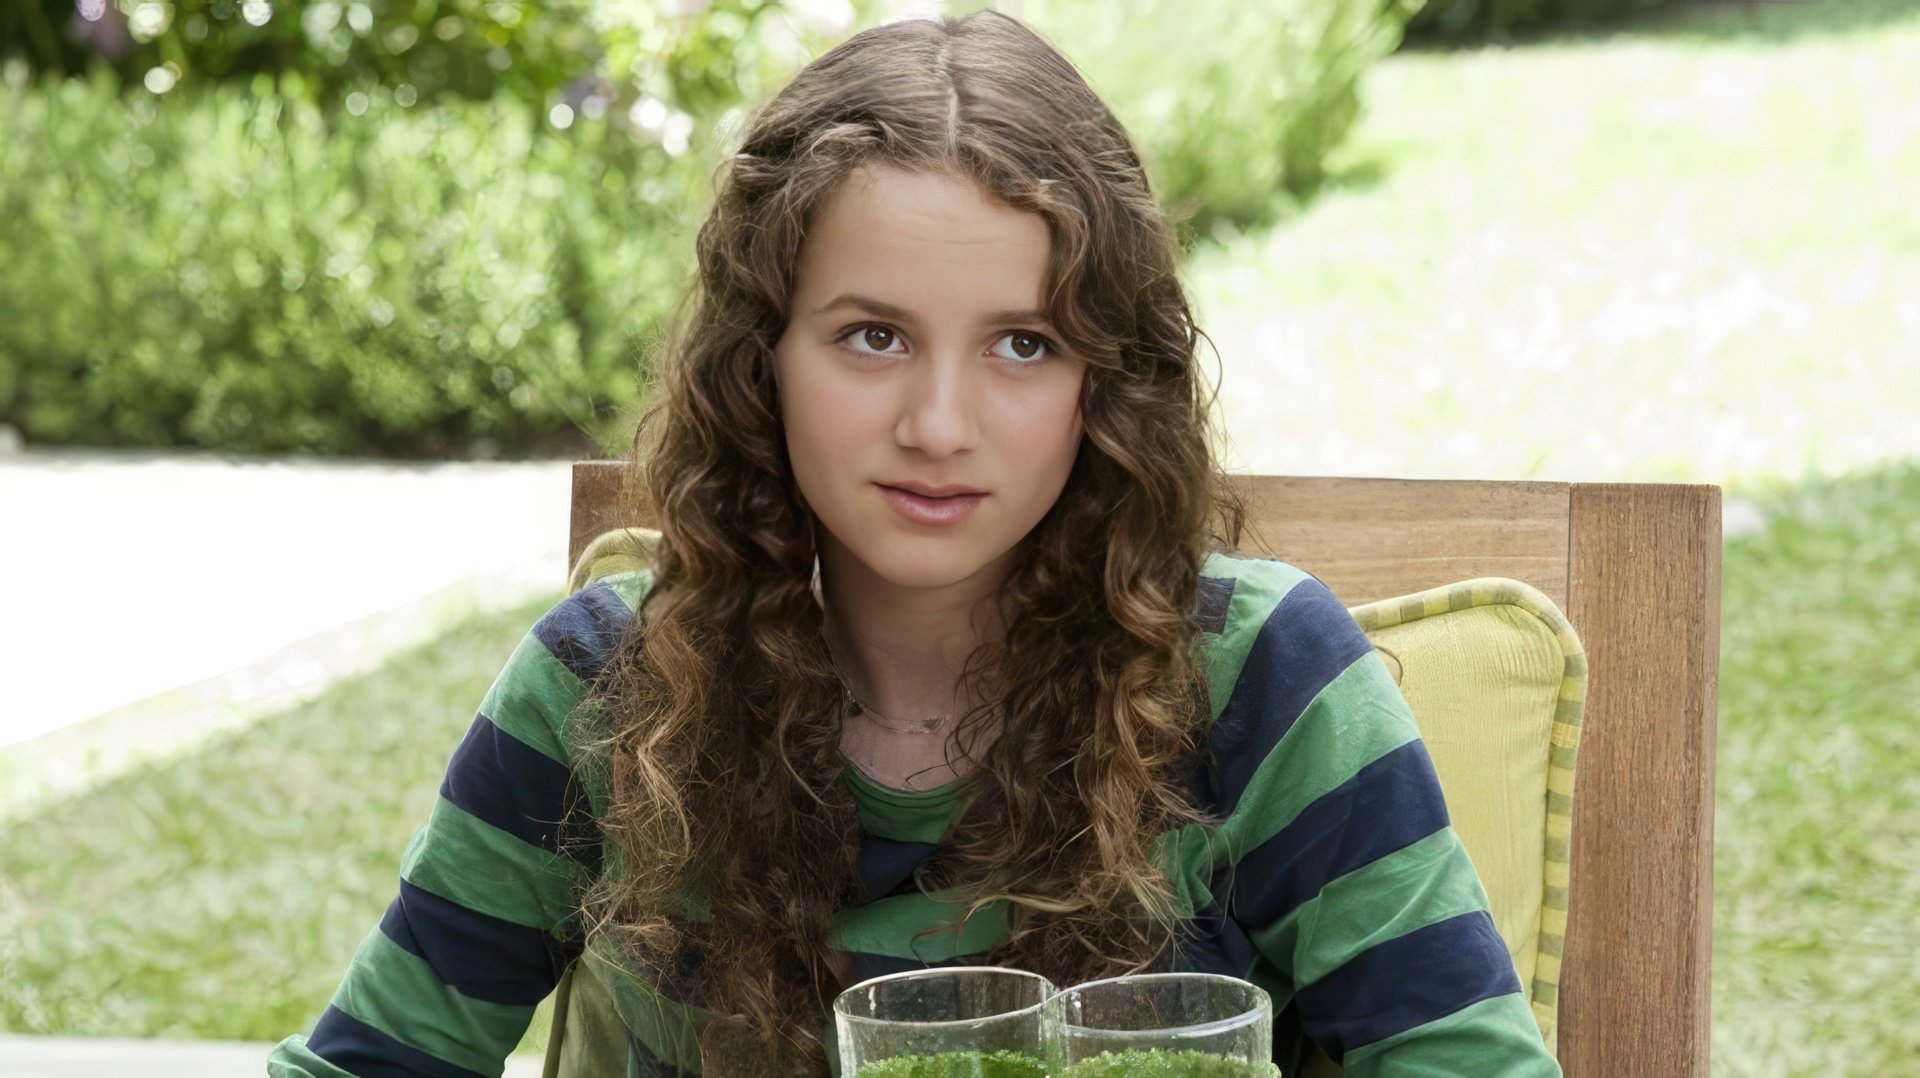 Maude Apatow in This is 40